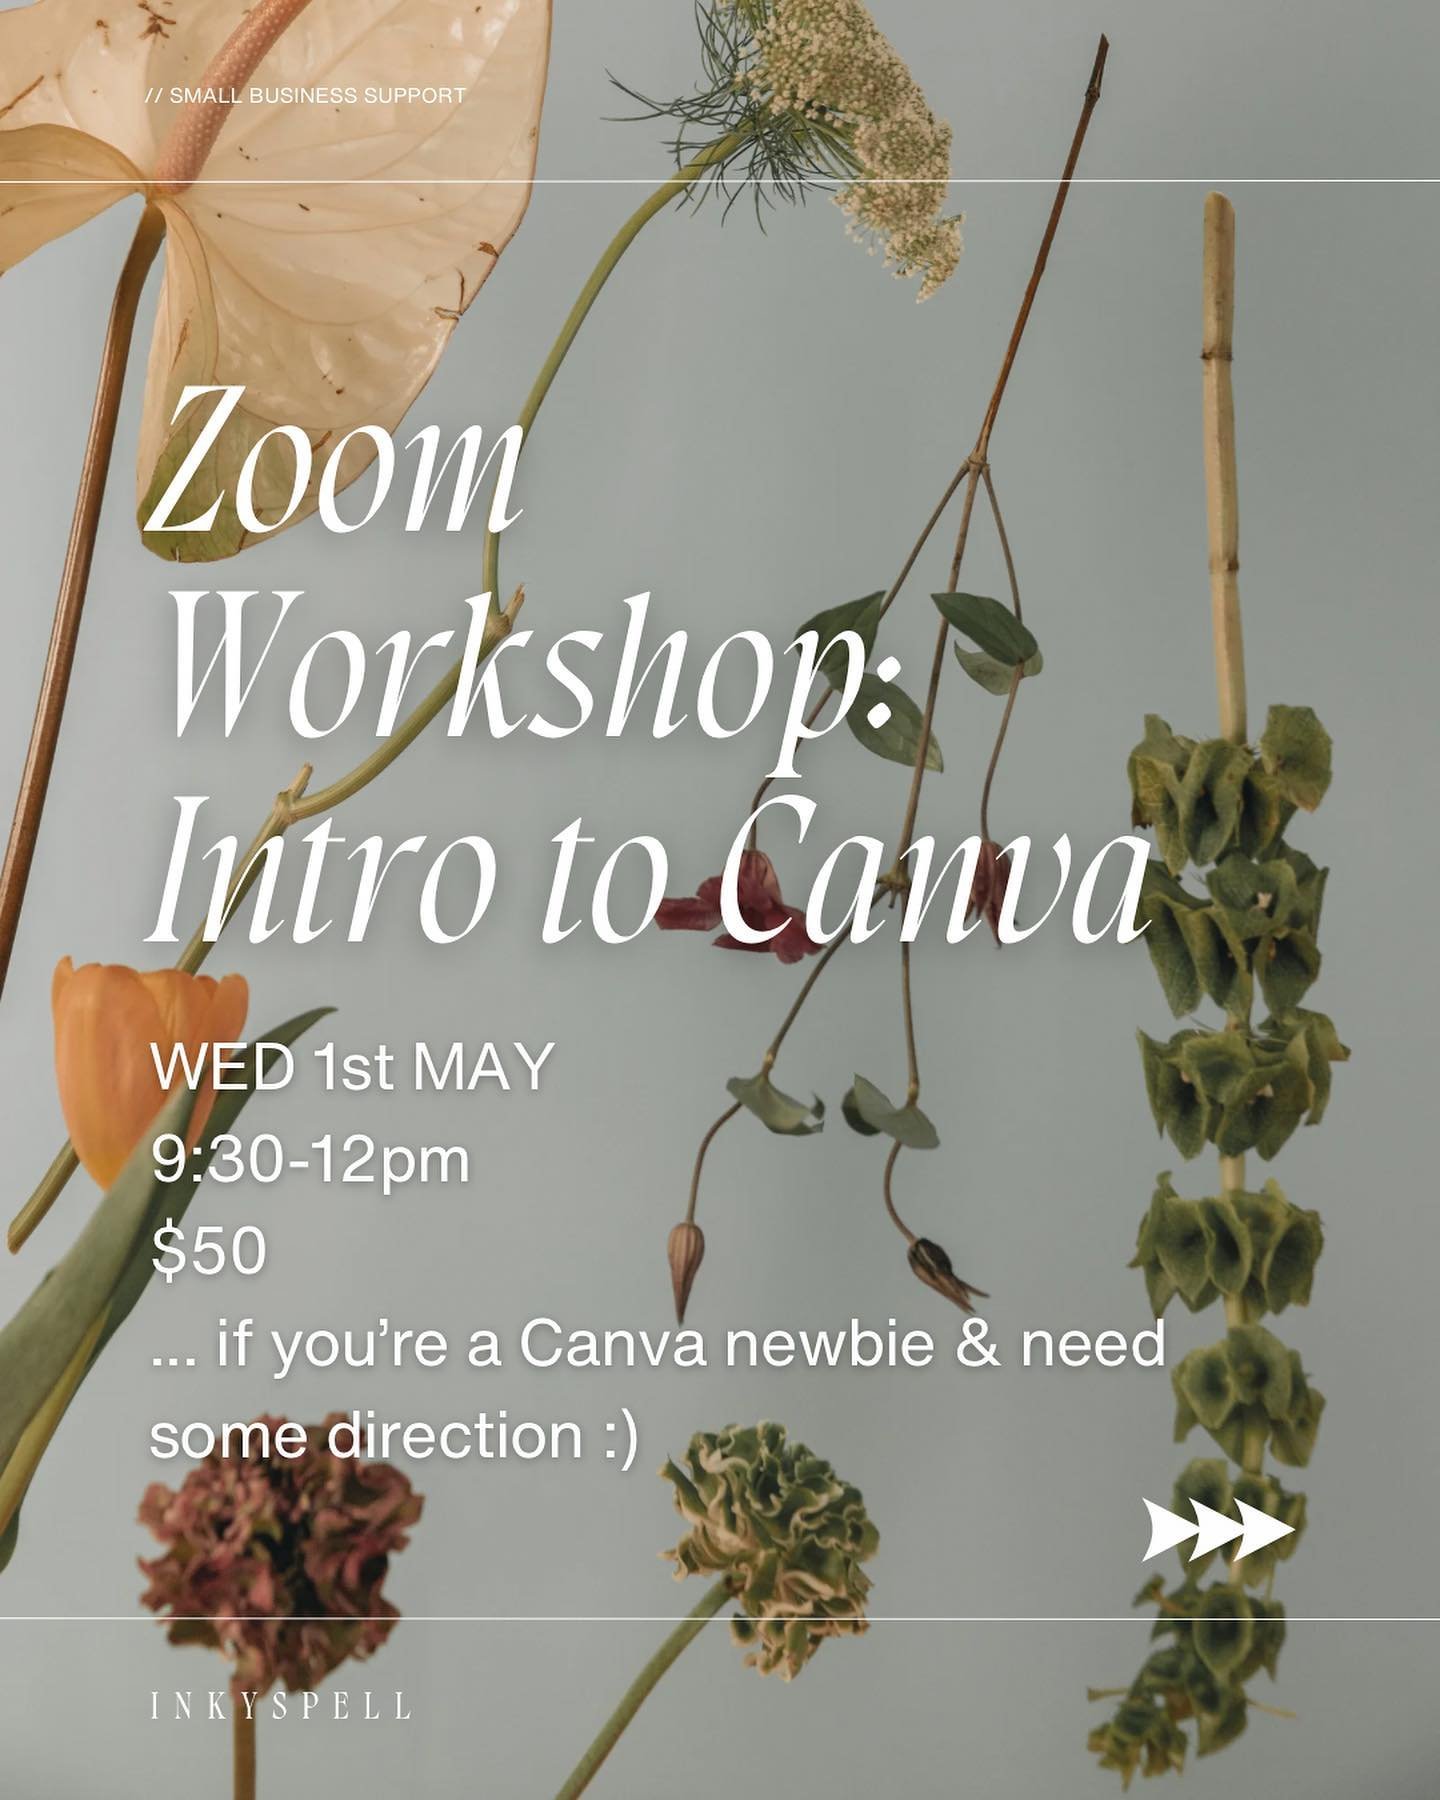 ~ LEARN ~ Hey there lovely people, next Wednesday 1st of May I&rsquo;m running my first Zoom Workshop: Intro to Canva.

This 2.5hr session is designed for beginners &amp; anyone who wants to learn the basic features of Canva. Maybe you don&rsquo;t ev